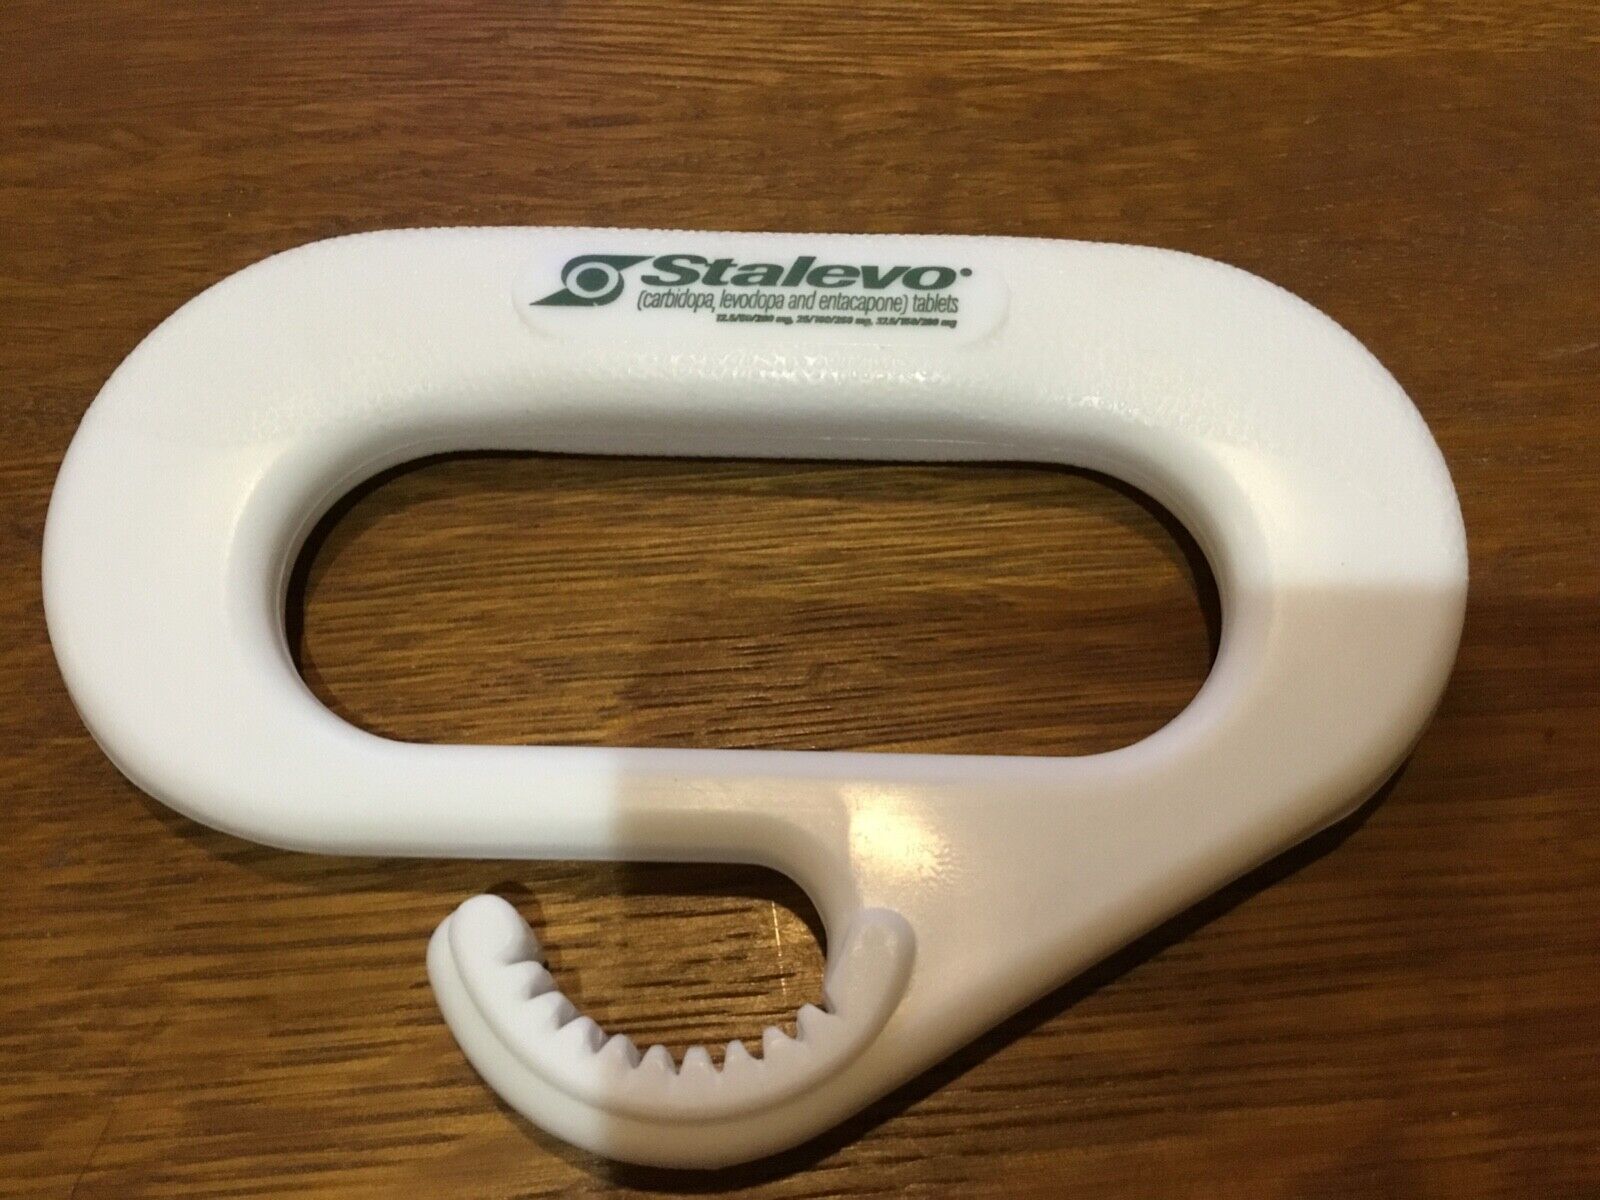 RARE STALEVO BAG CARRYING HANDLE FOR PARKINSON'S DISEASE PATIENTS DRUG REP PROMO